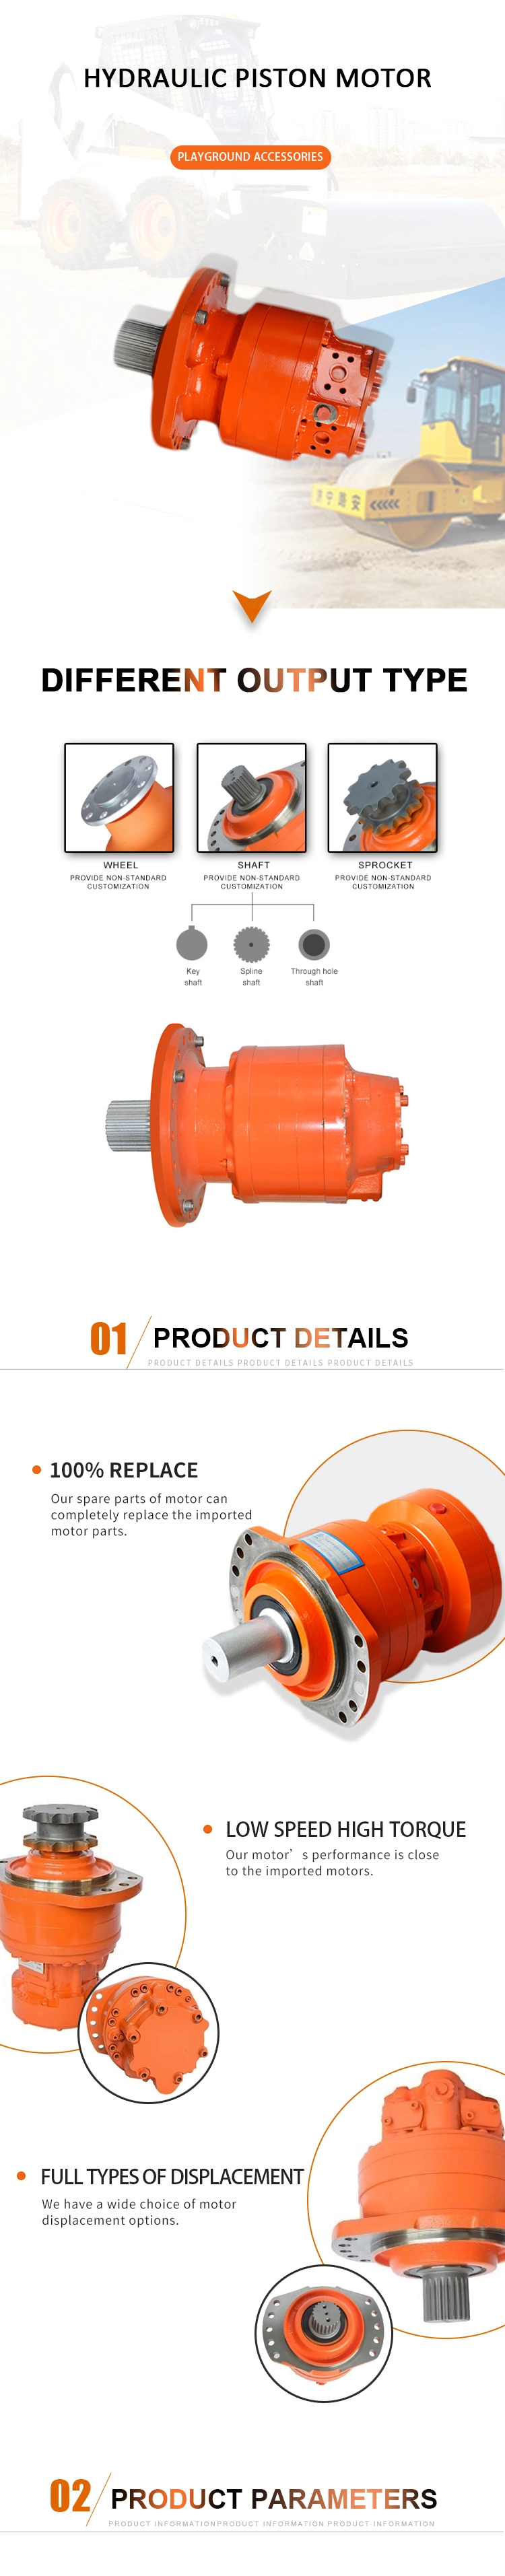 China Manufacturer of Poclain Ms Series Hydraulic Motor